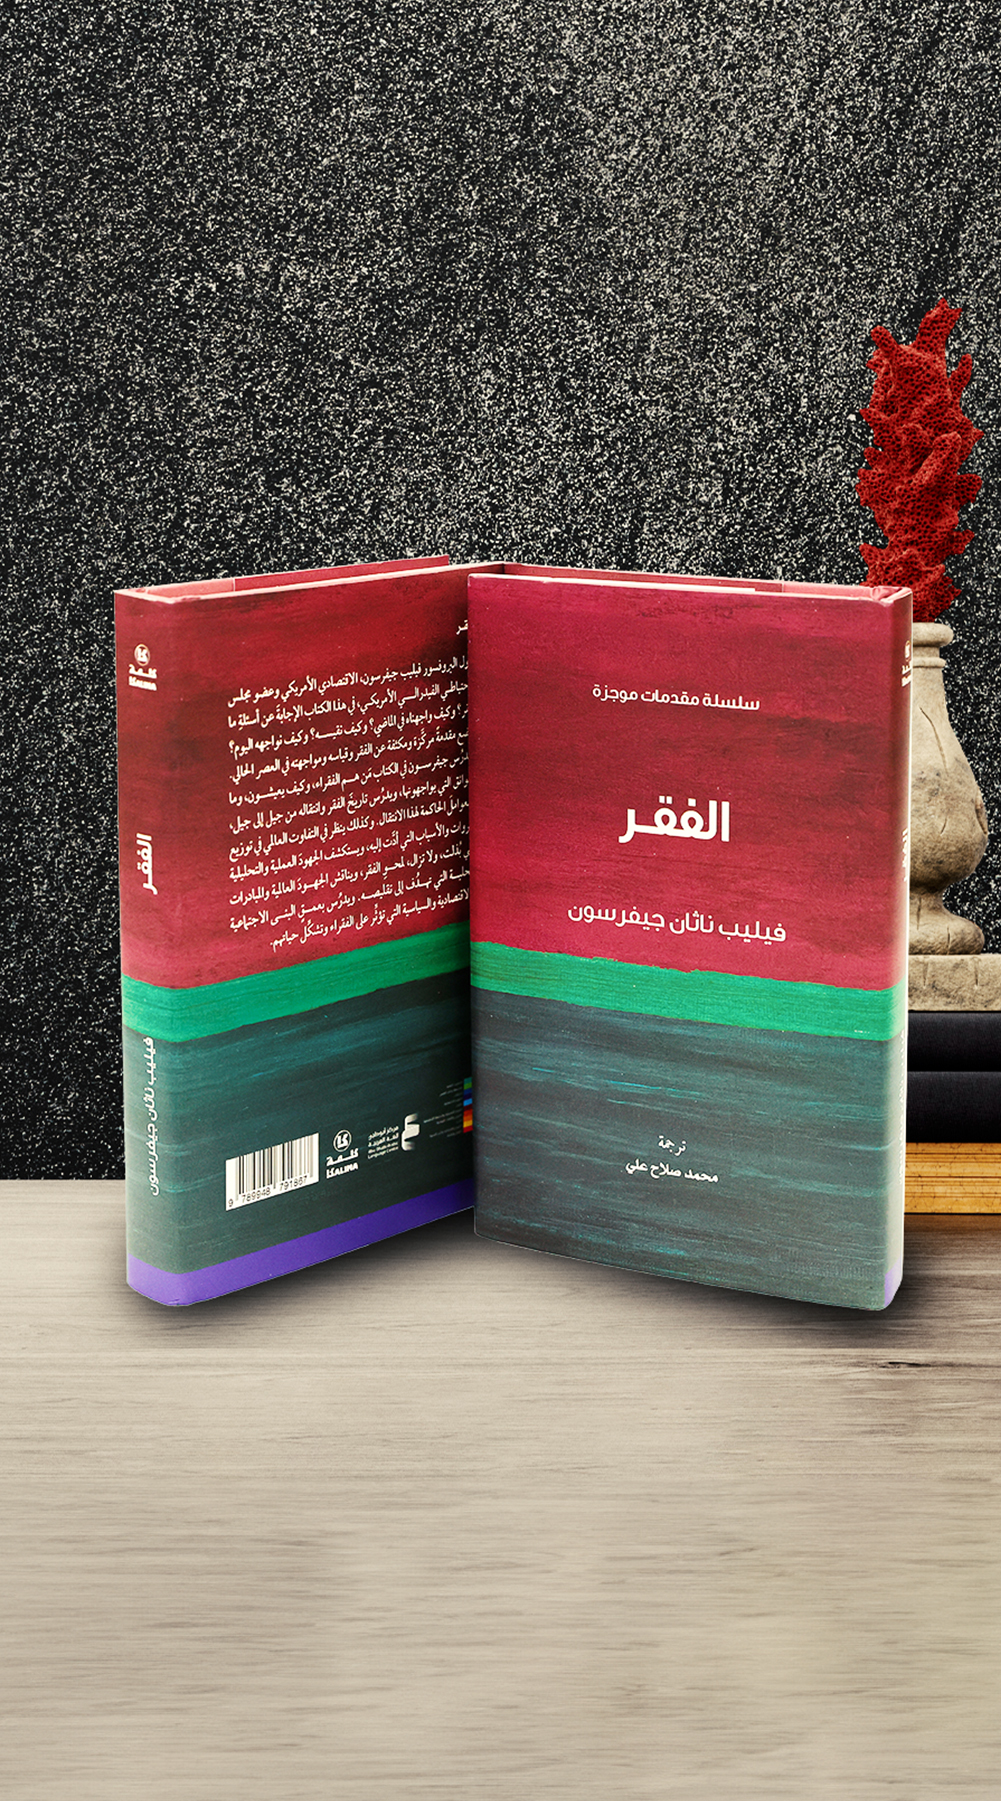 Abu Dhabi Arabic Language Centre releases Arabic Edition of ‘Poverty: A Very Short Introduction’ by Philip Nathan Jefferson